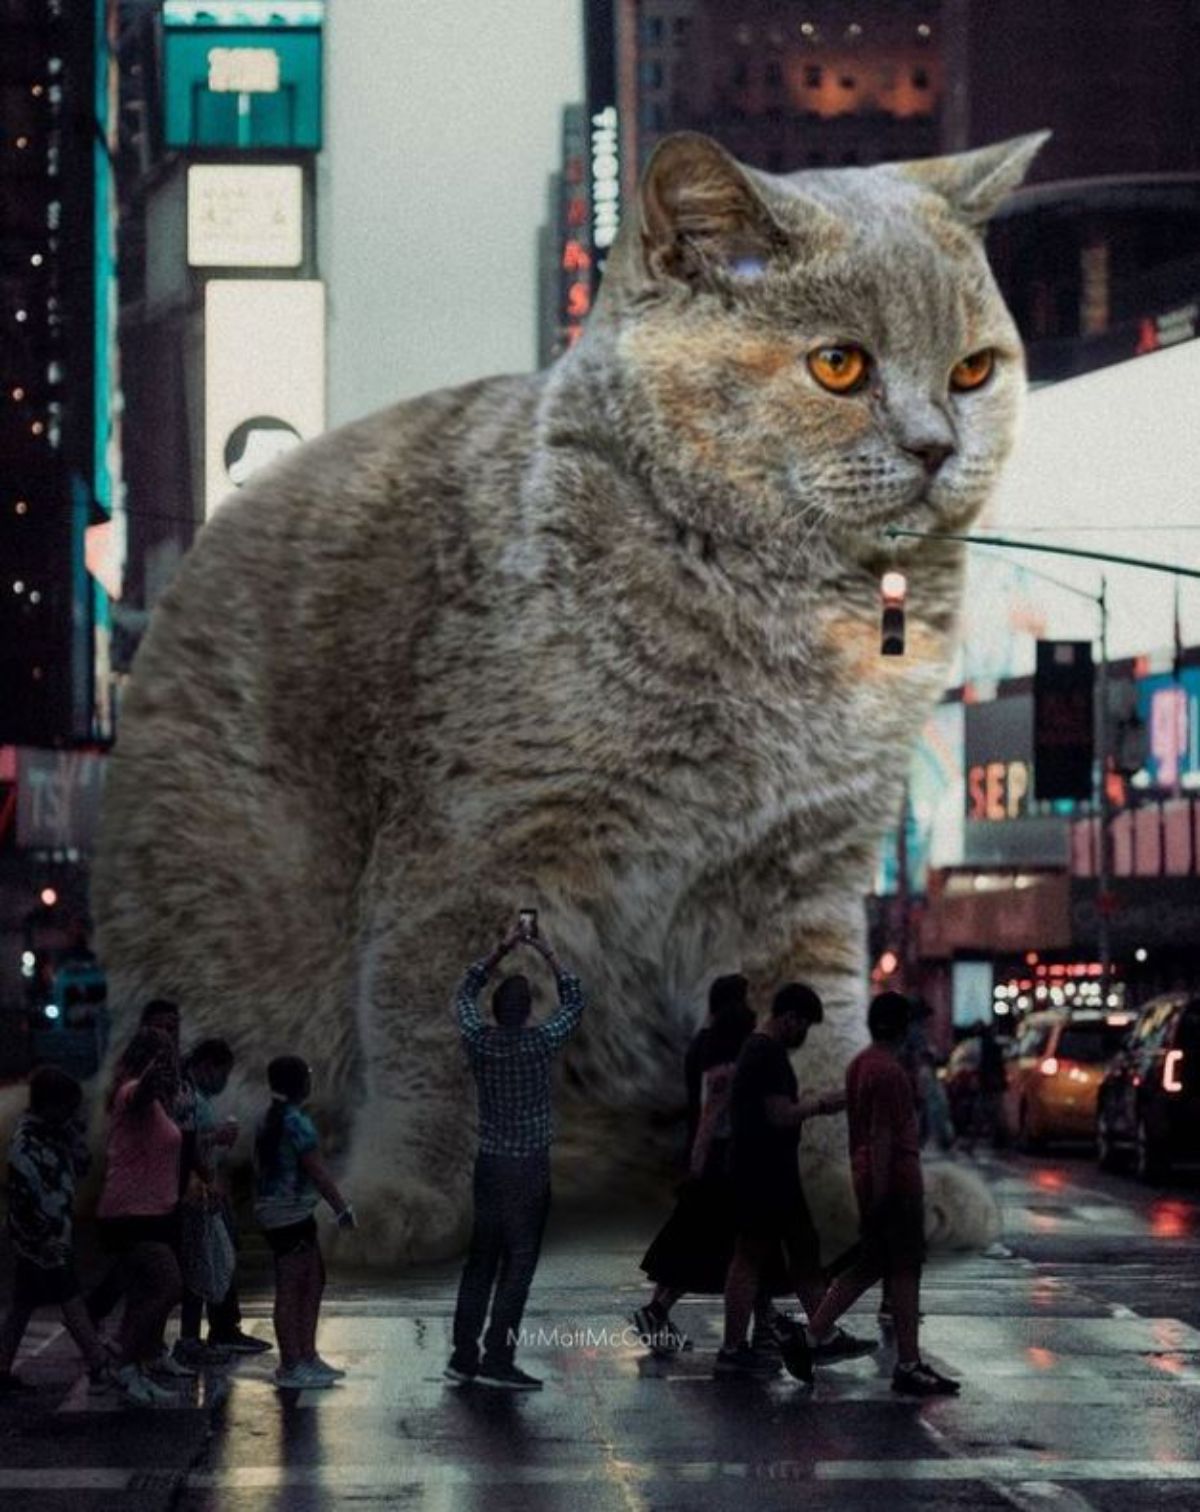 large photoshopped grey and orange cat standing on the road with people and vehicles around the cat